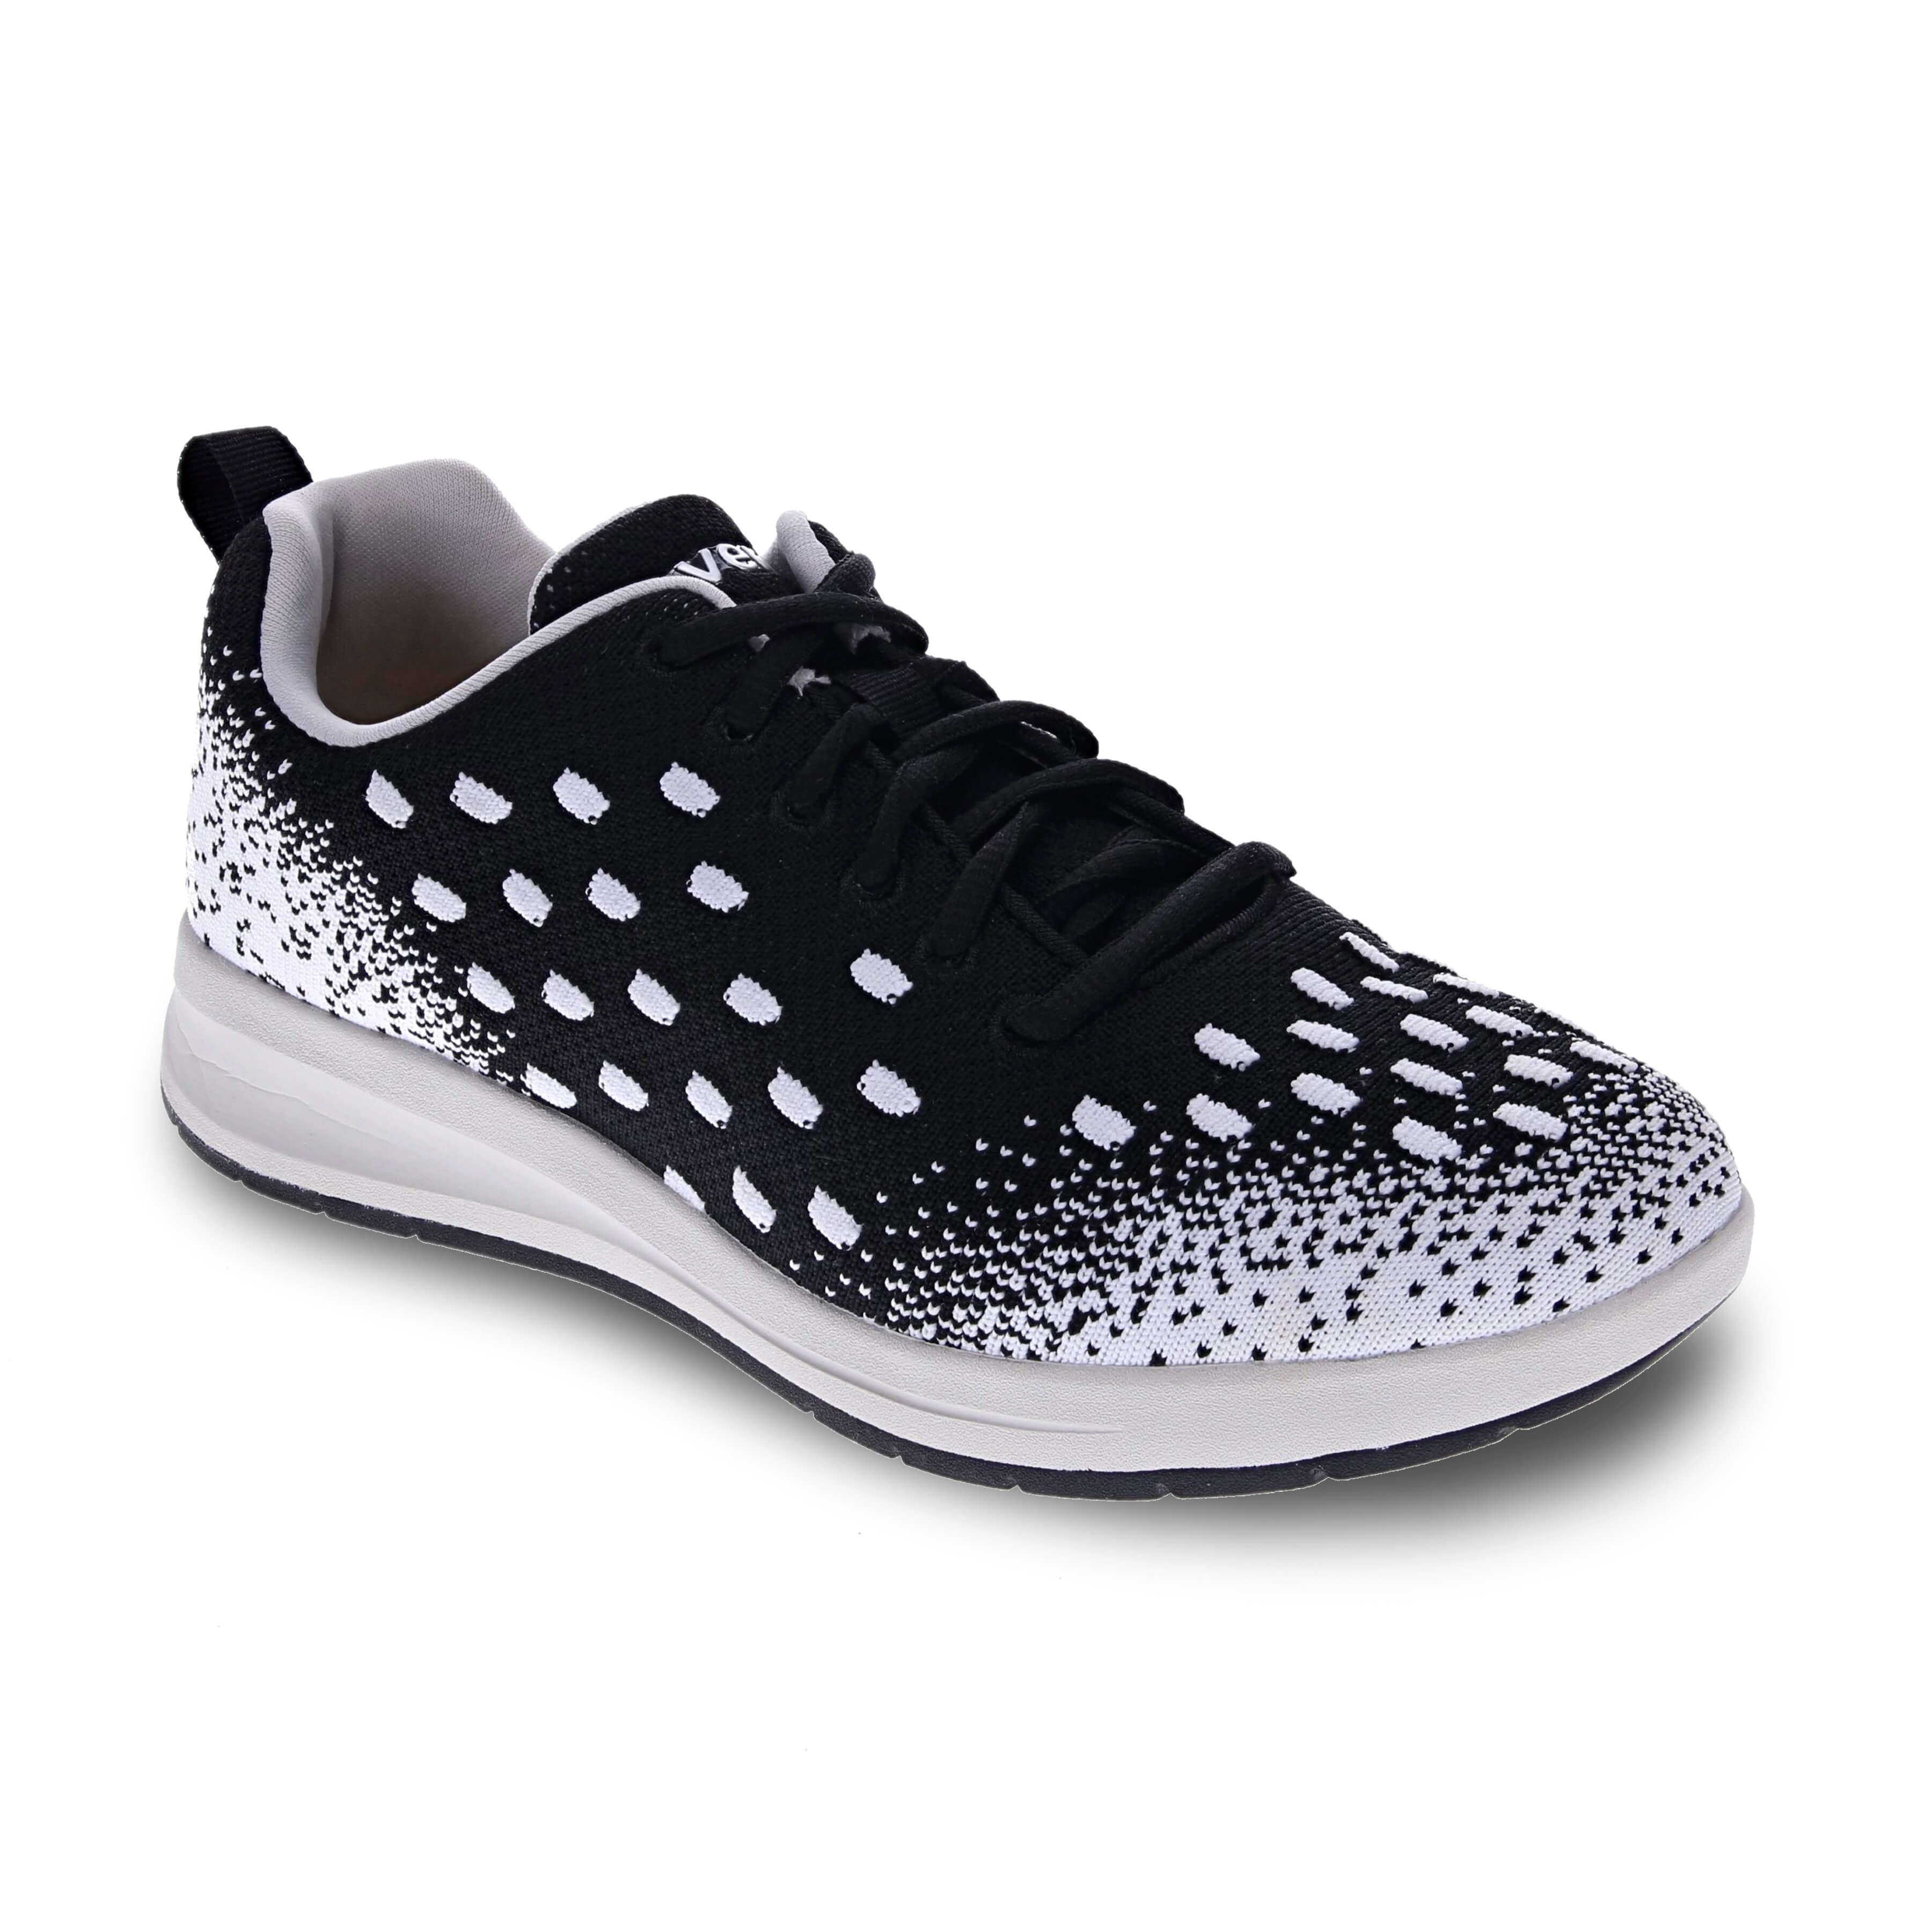 Revere Haiti - Women's Casual Sneaker - Extra Depth With Removable Footbeds